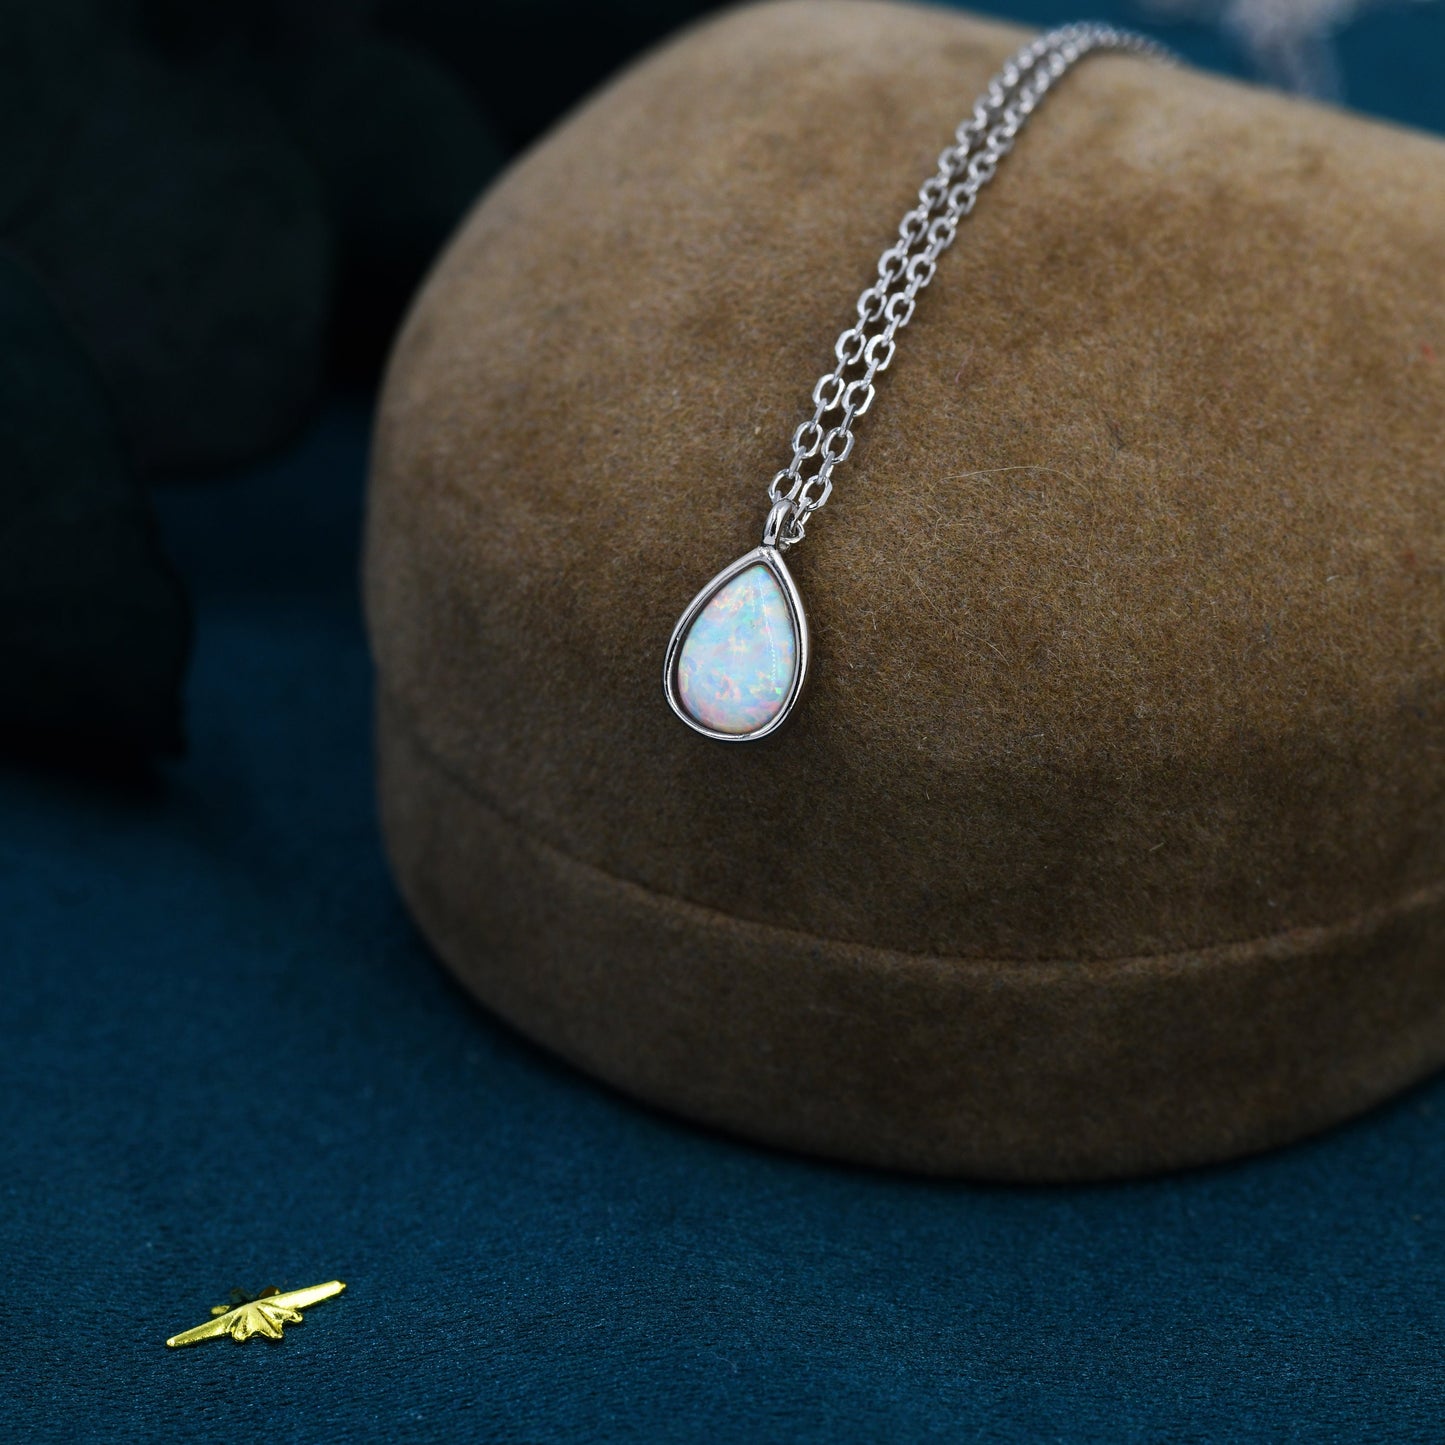 Droplet White Opal Pendant Necklace in Sterling Silver, Lab Opal Necklace,  Pear Shape Opal Necklace, Fire Opal Necklace